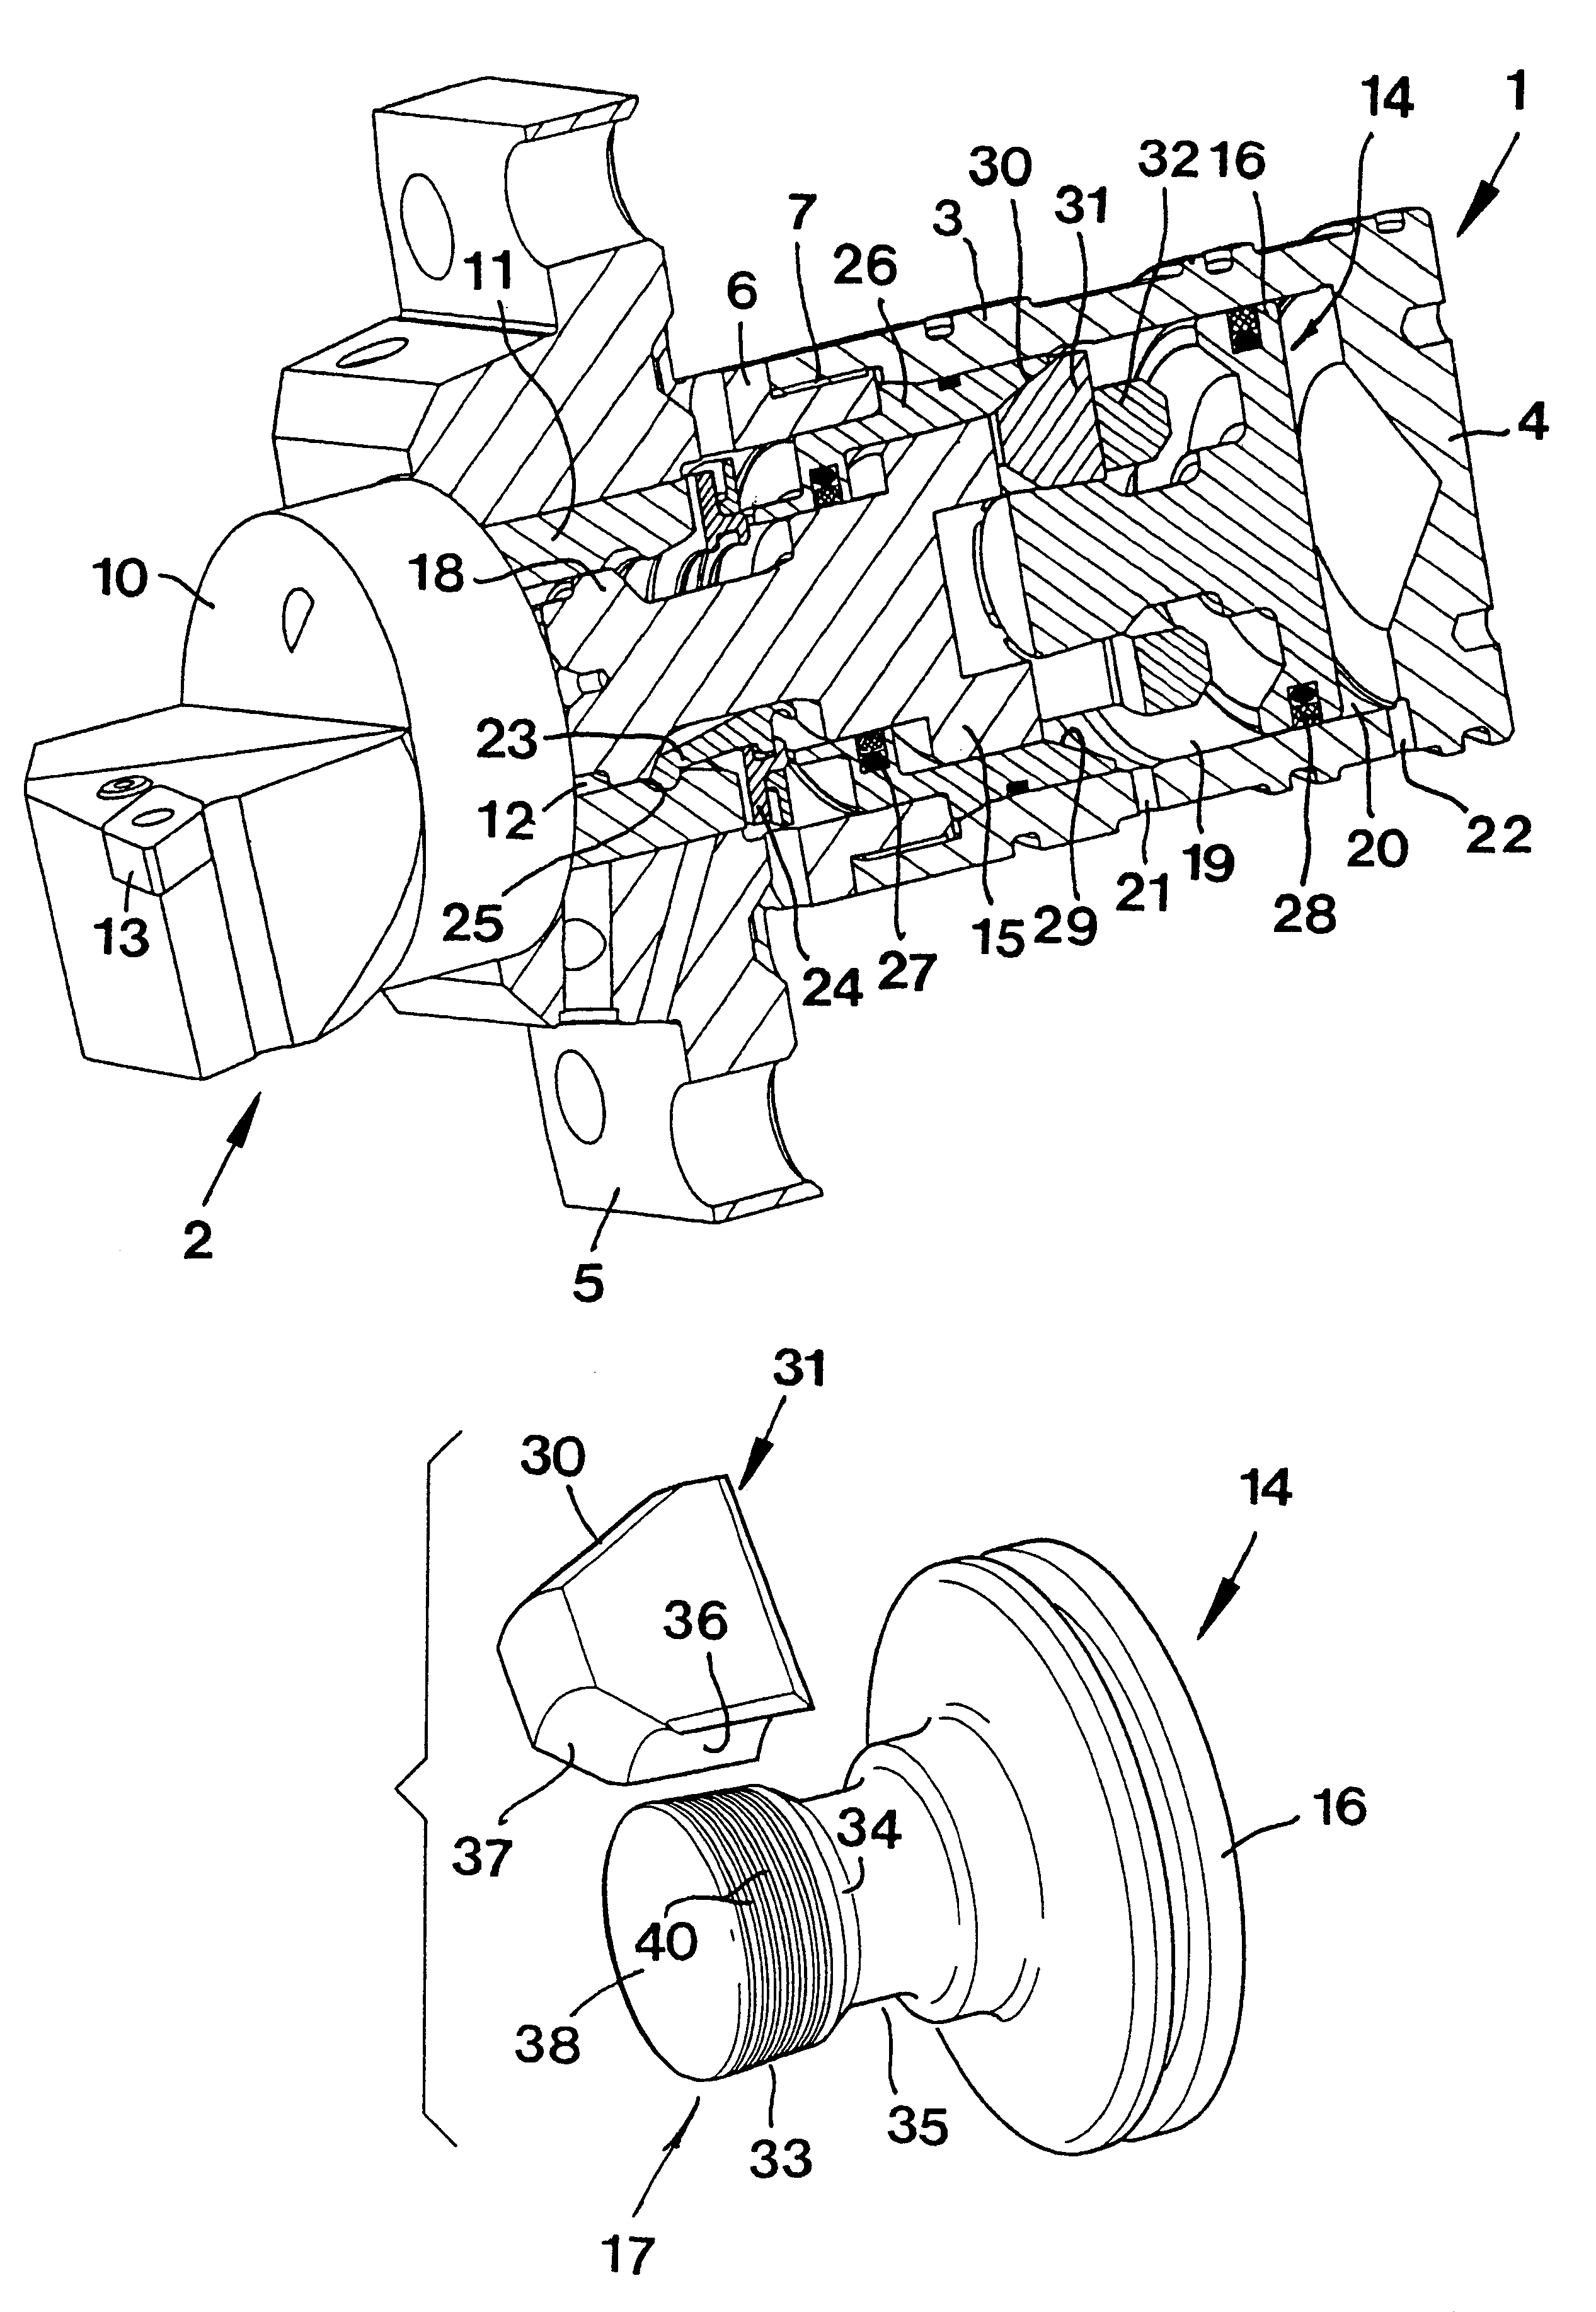 Holder including a hydraulic piston for the detachable assembly of cutting tools